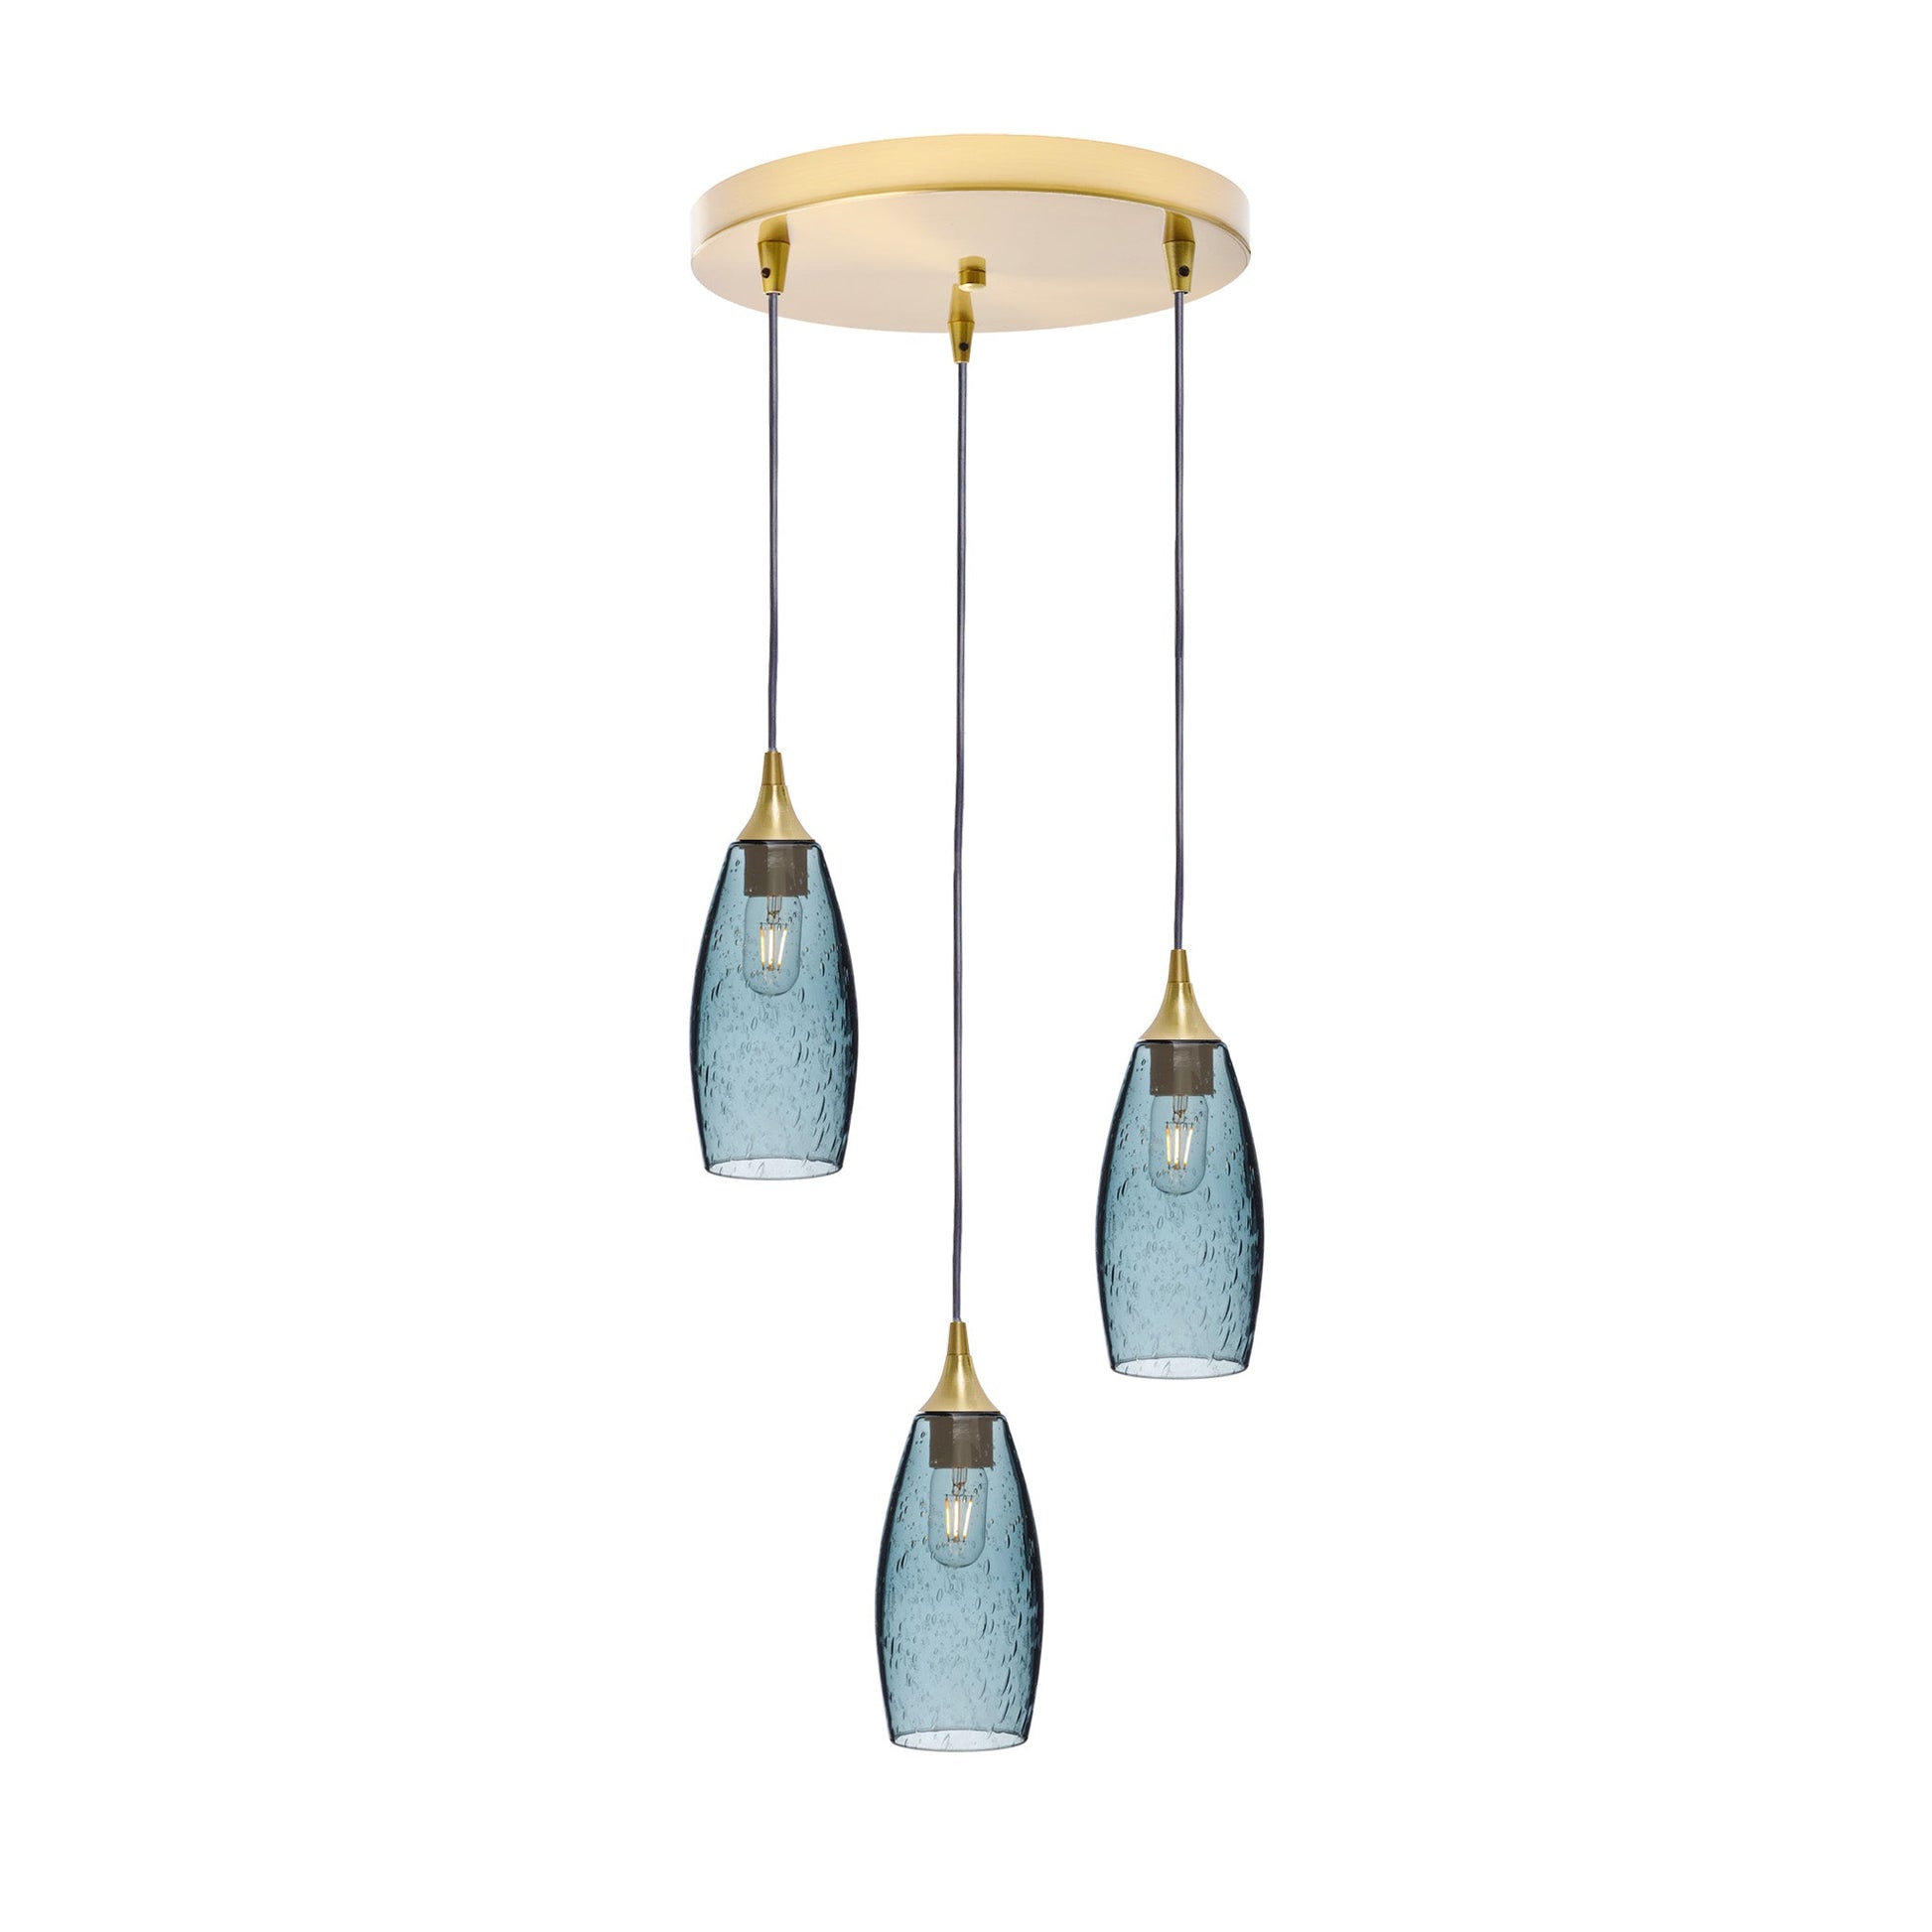 147 Lunar: 3 Pendant Cascade Chandelier-Glass-Bicycle Glass Co - Hotshop-Slate Gray-Polished Brass-Bicycle Glass Co